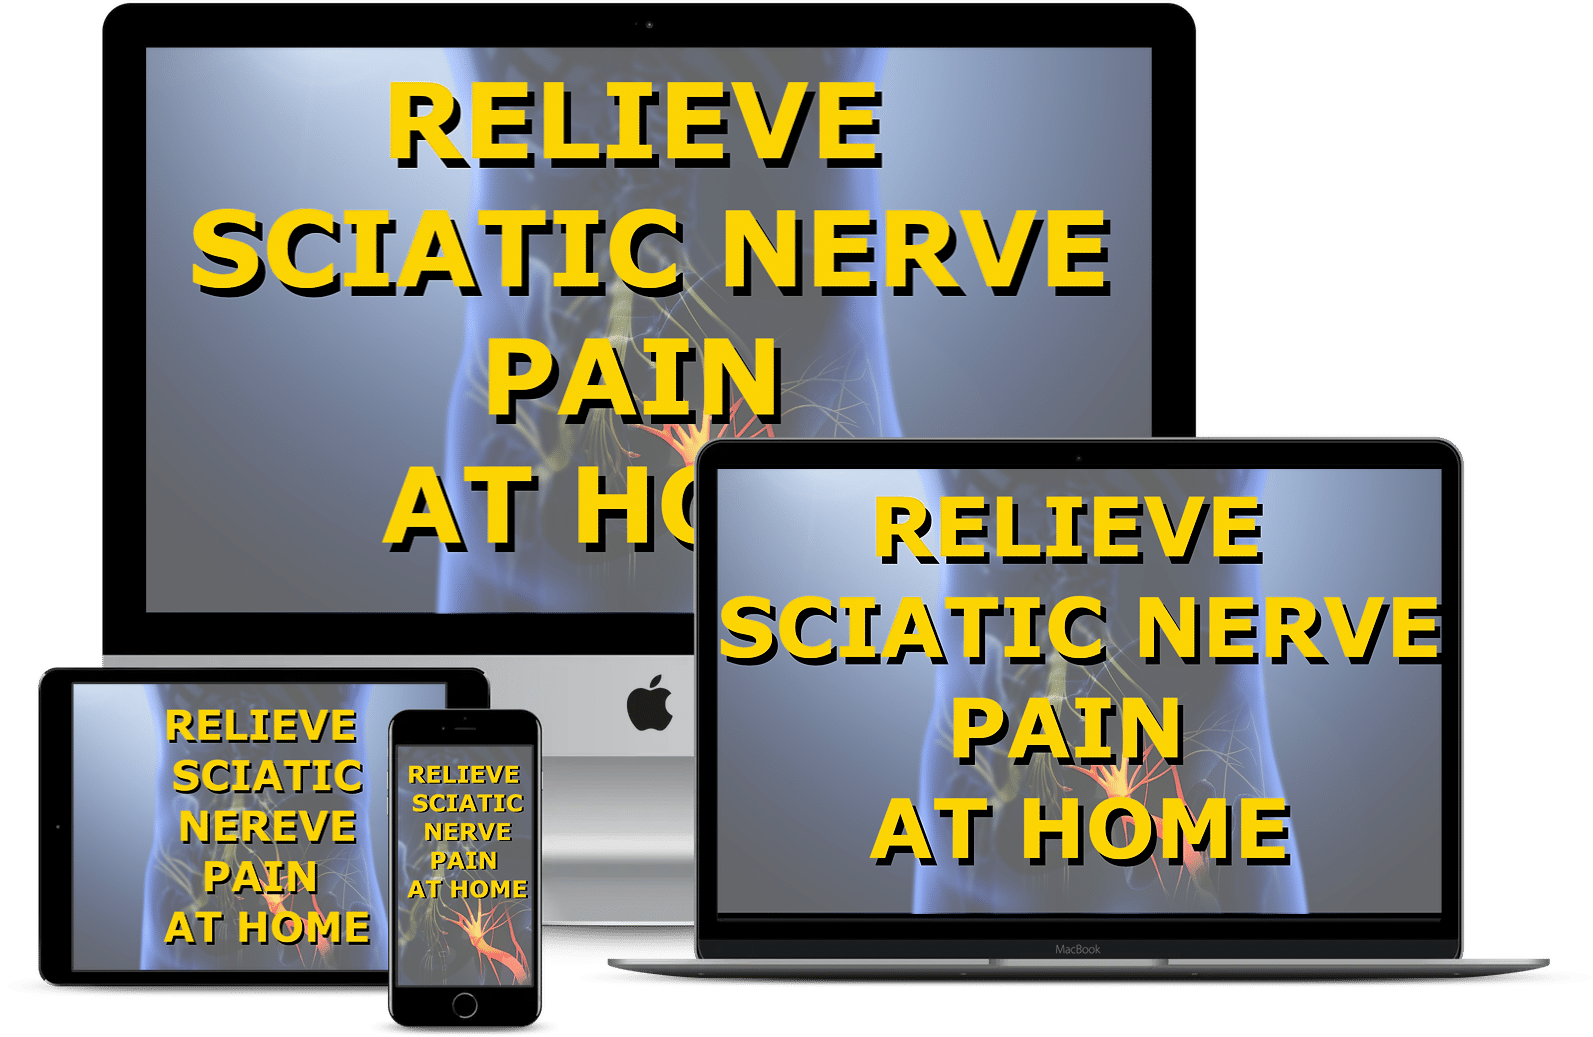 relieve sciatic nerve pain at home